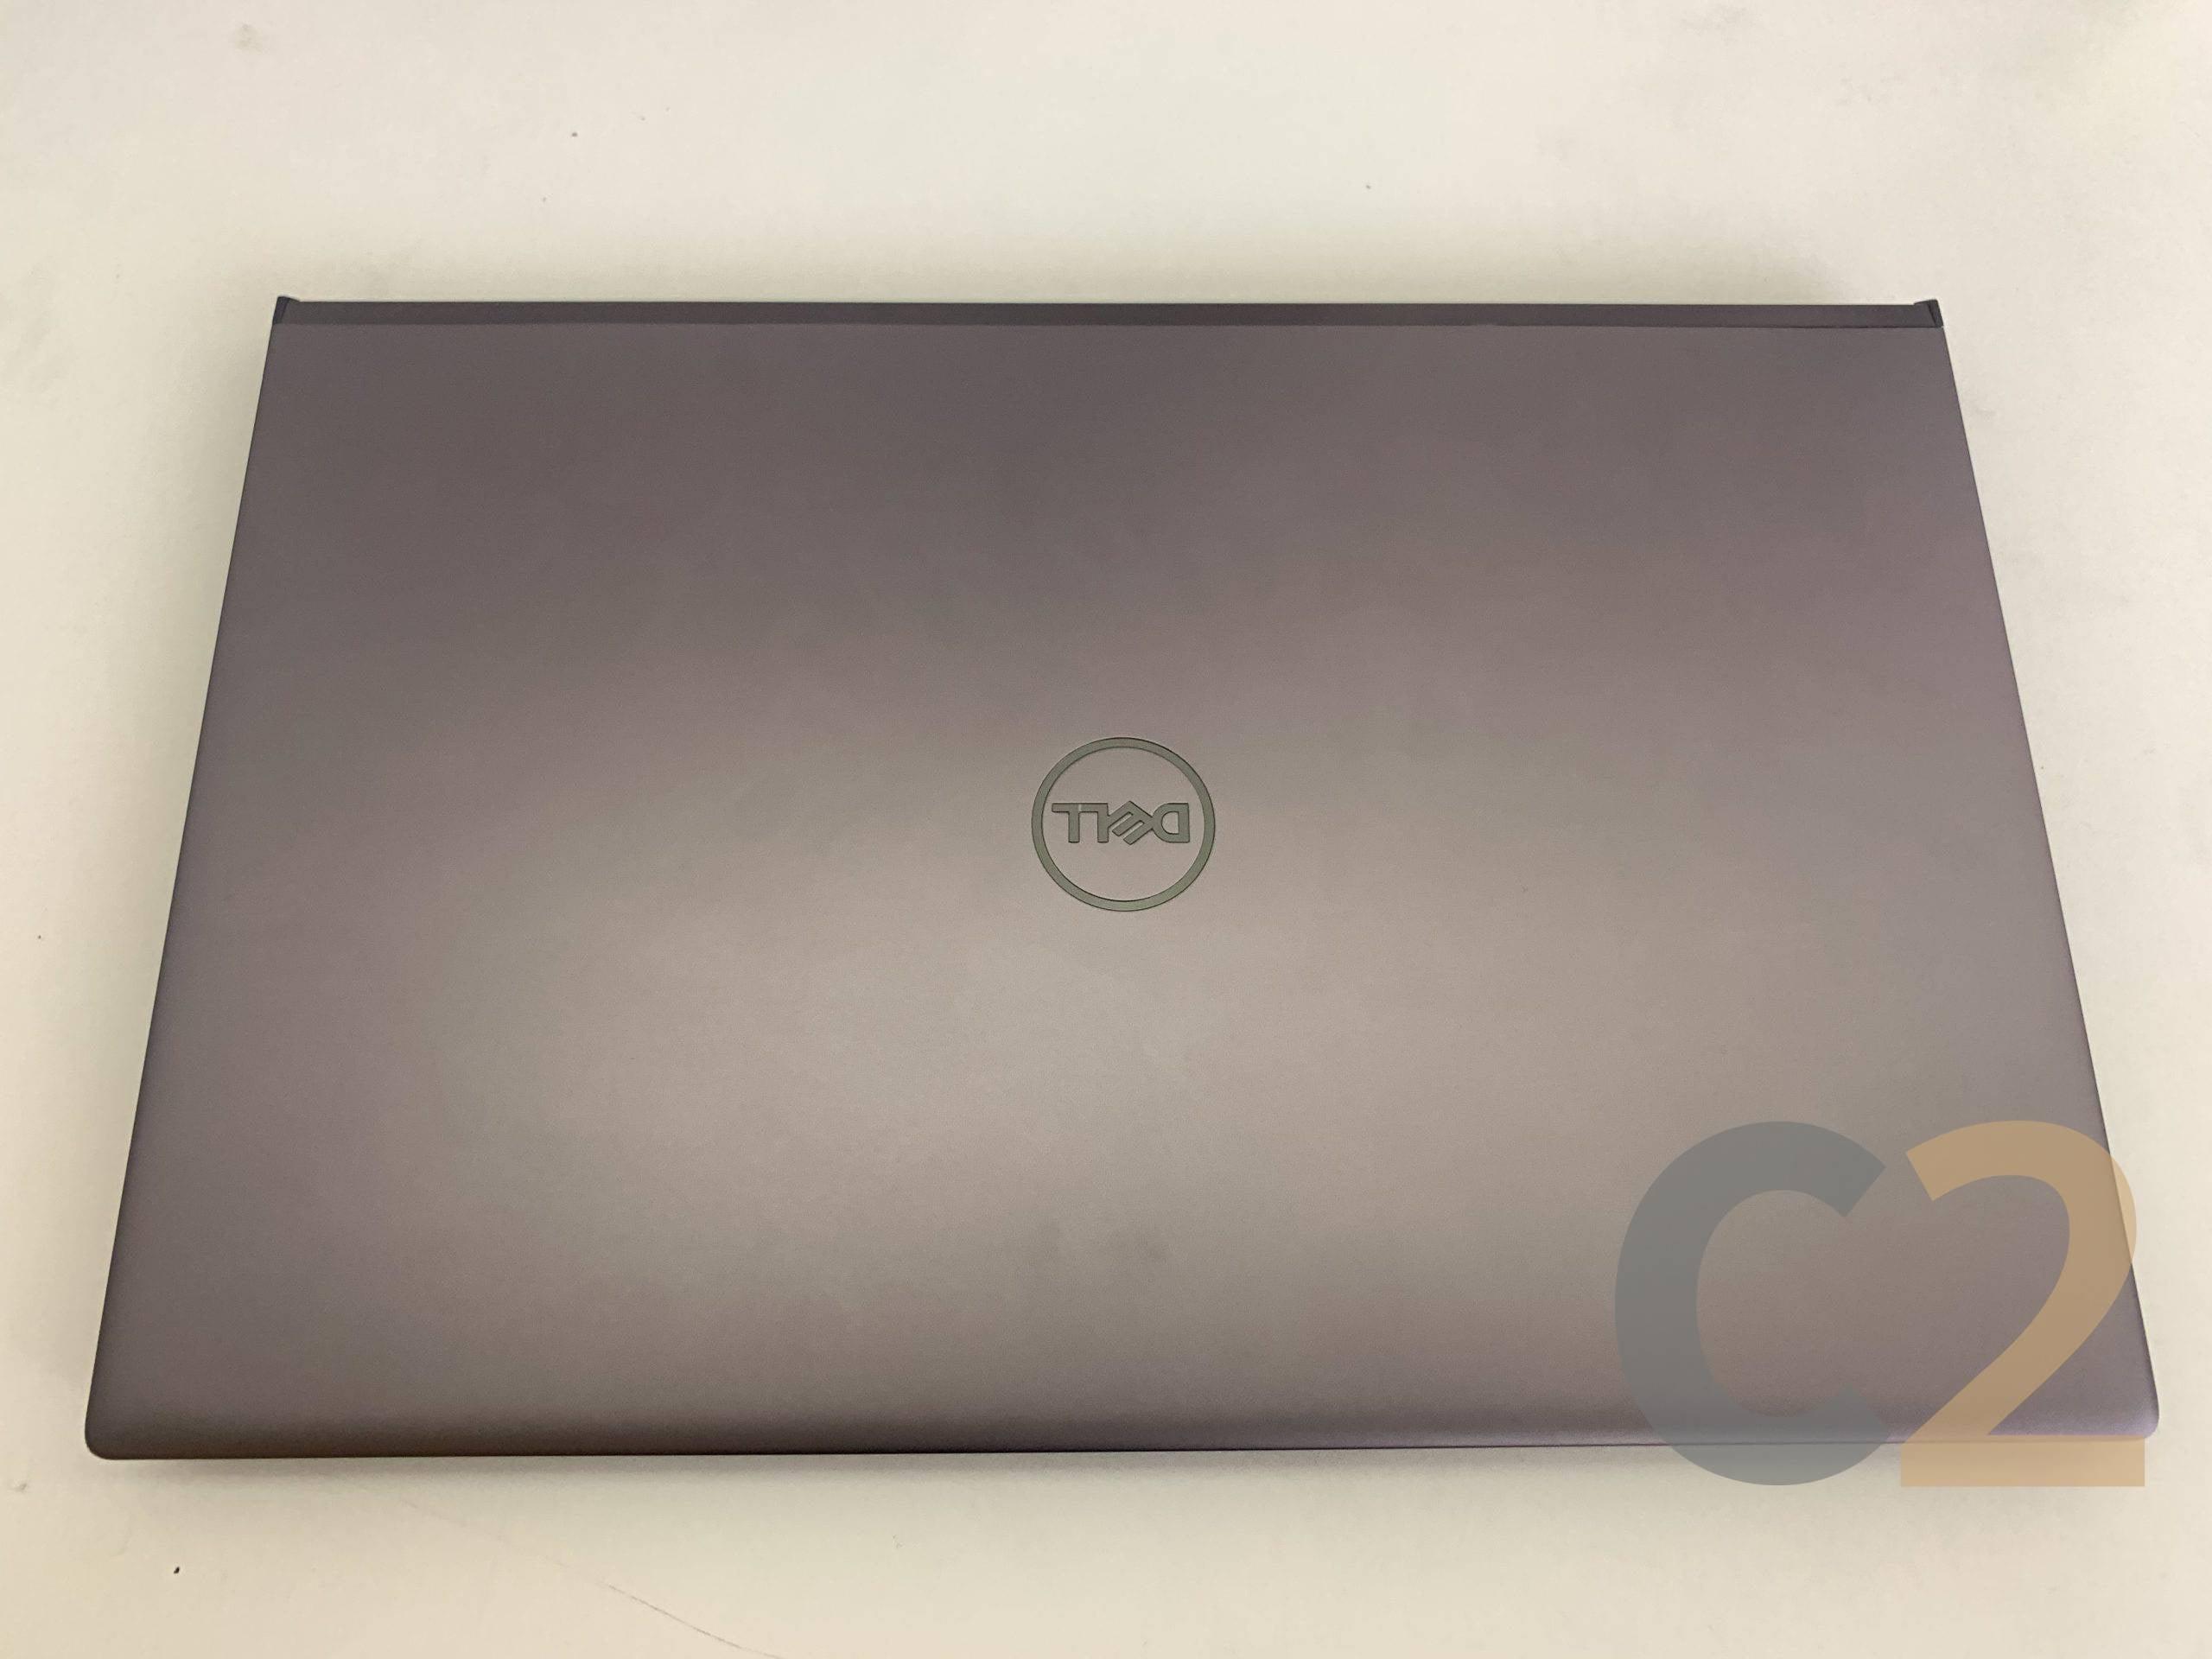 (USED) DELL Vostro 7500 i5-10300H 4G 128-SSD NA GTX 1650 4GB 15.6inch 1920x1080 Business Laptop 95% - C2 Computer